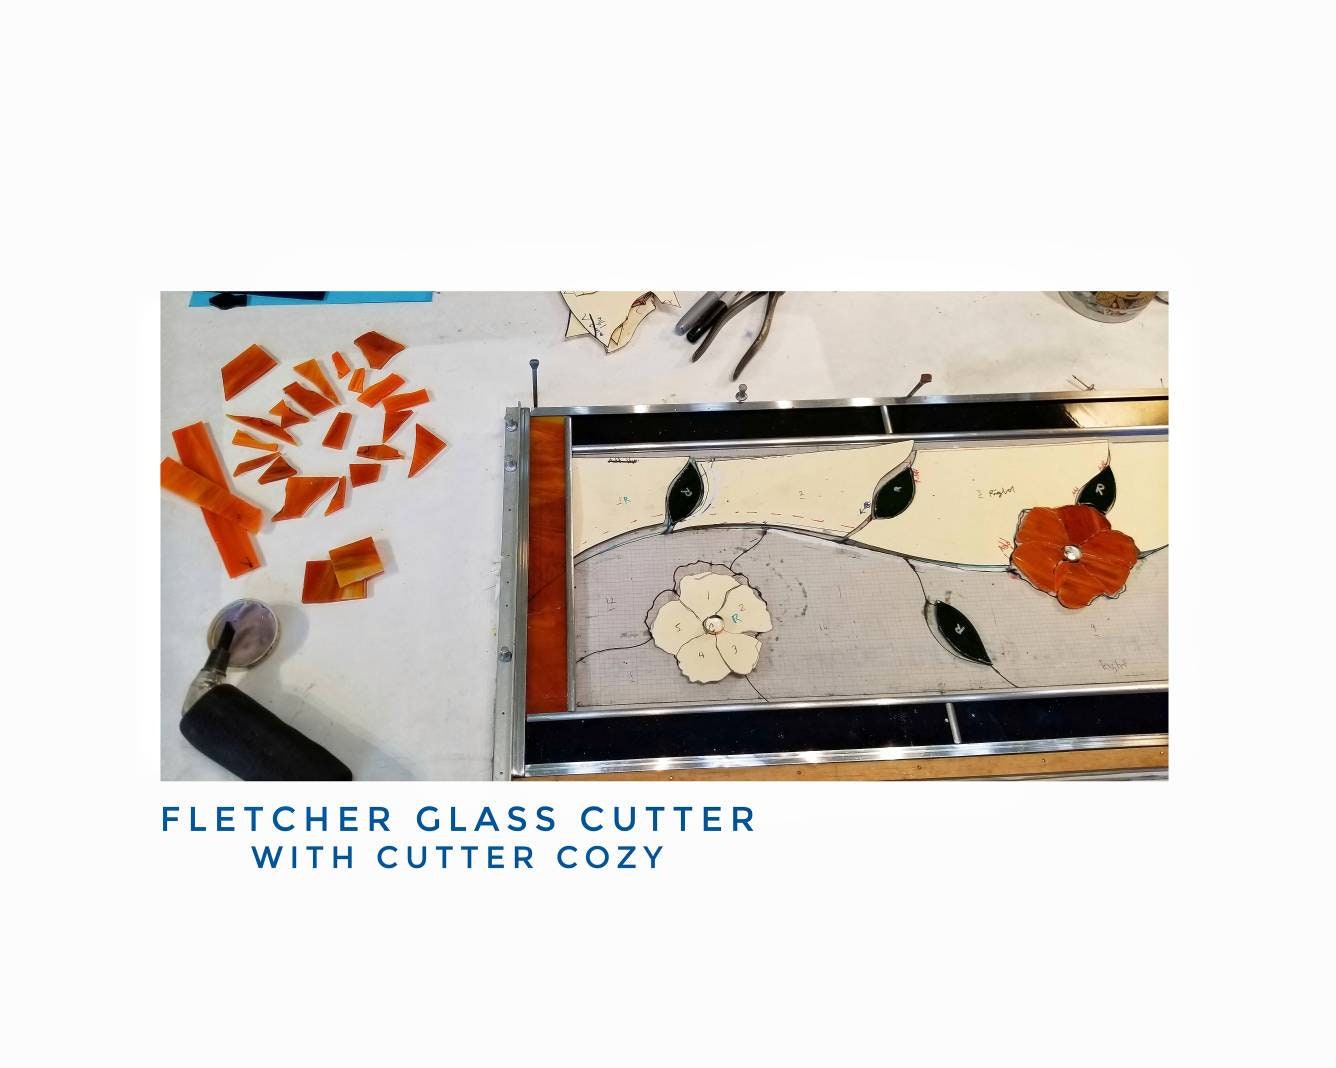 Glass Cutter & Cushion Grip. Stained Glass Tool by Fletcher. Carbide Wheel. Ergonomic, Comfortable. Beginner or Advanced, nice gift.